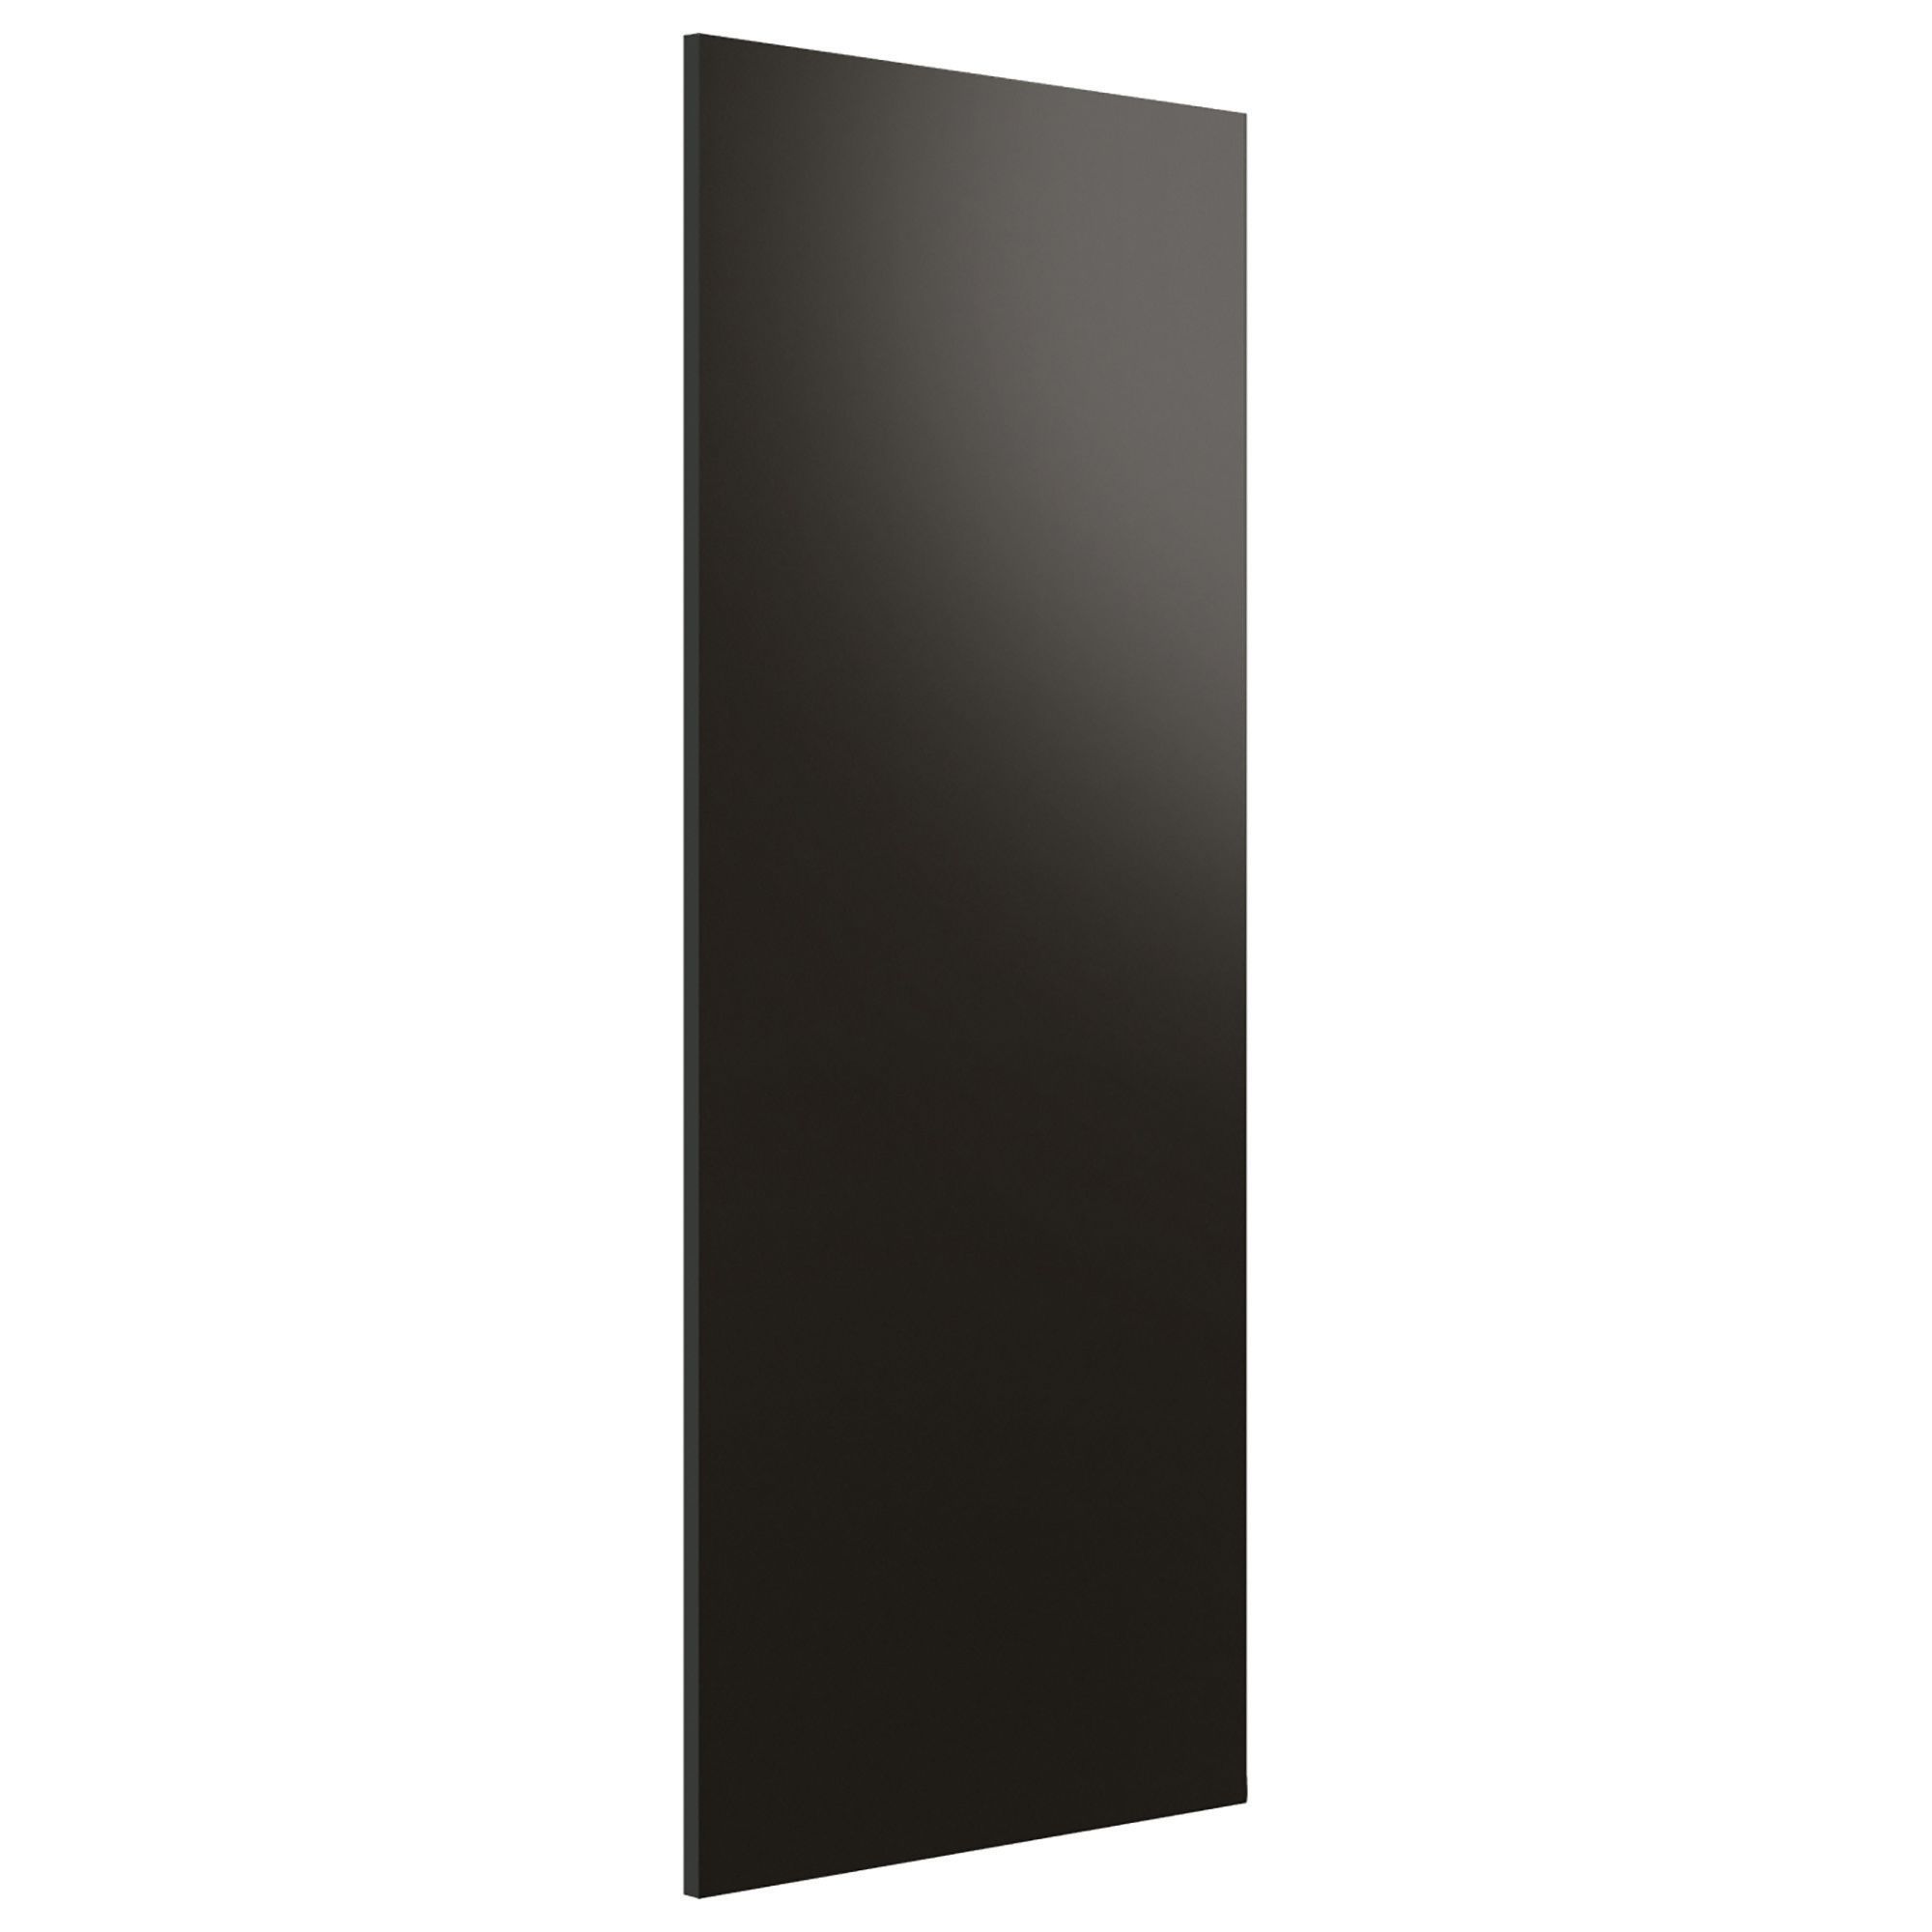 Image of Spacepro Wardrobe End Panel Black - 2800mm x 620mm x 18mm with Fixing Blocks